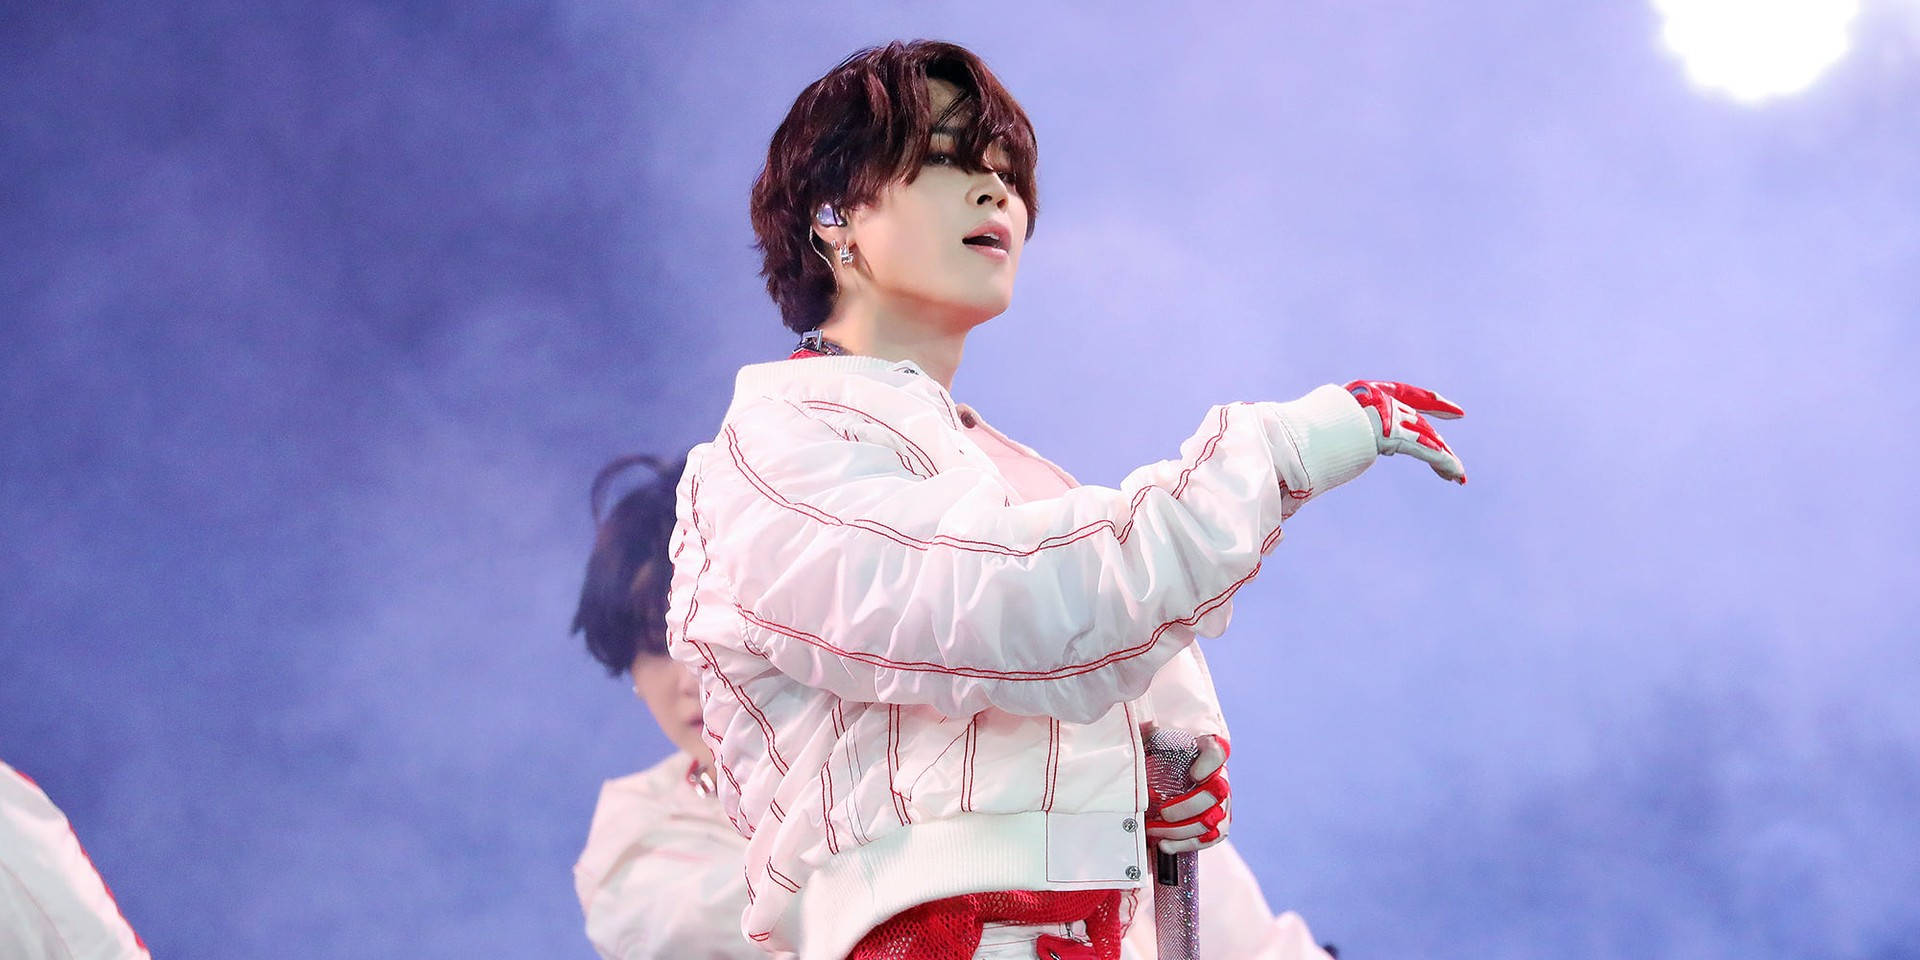 Jimin Of Bts Performing On Stage Background